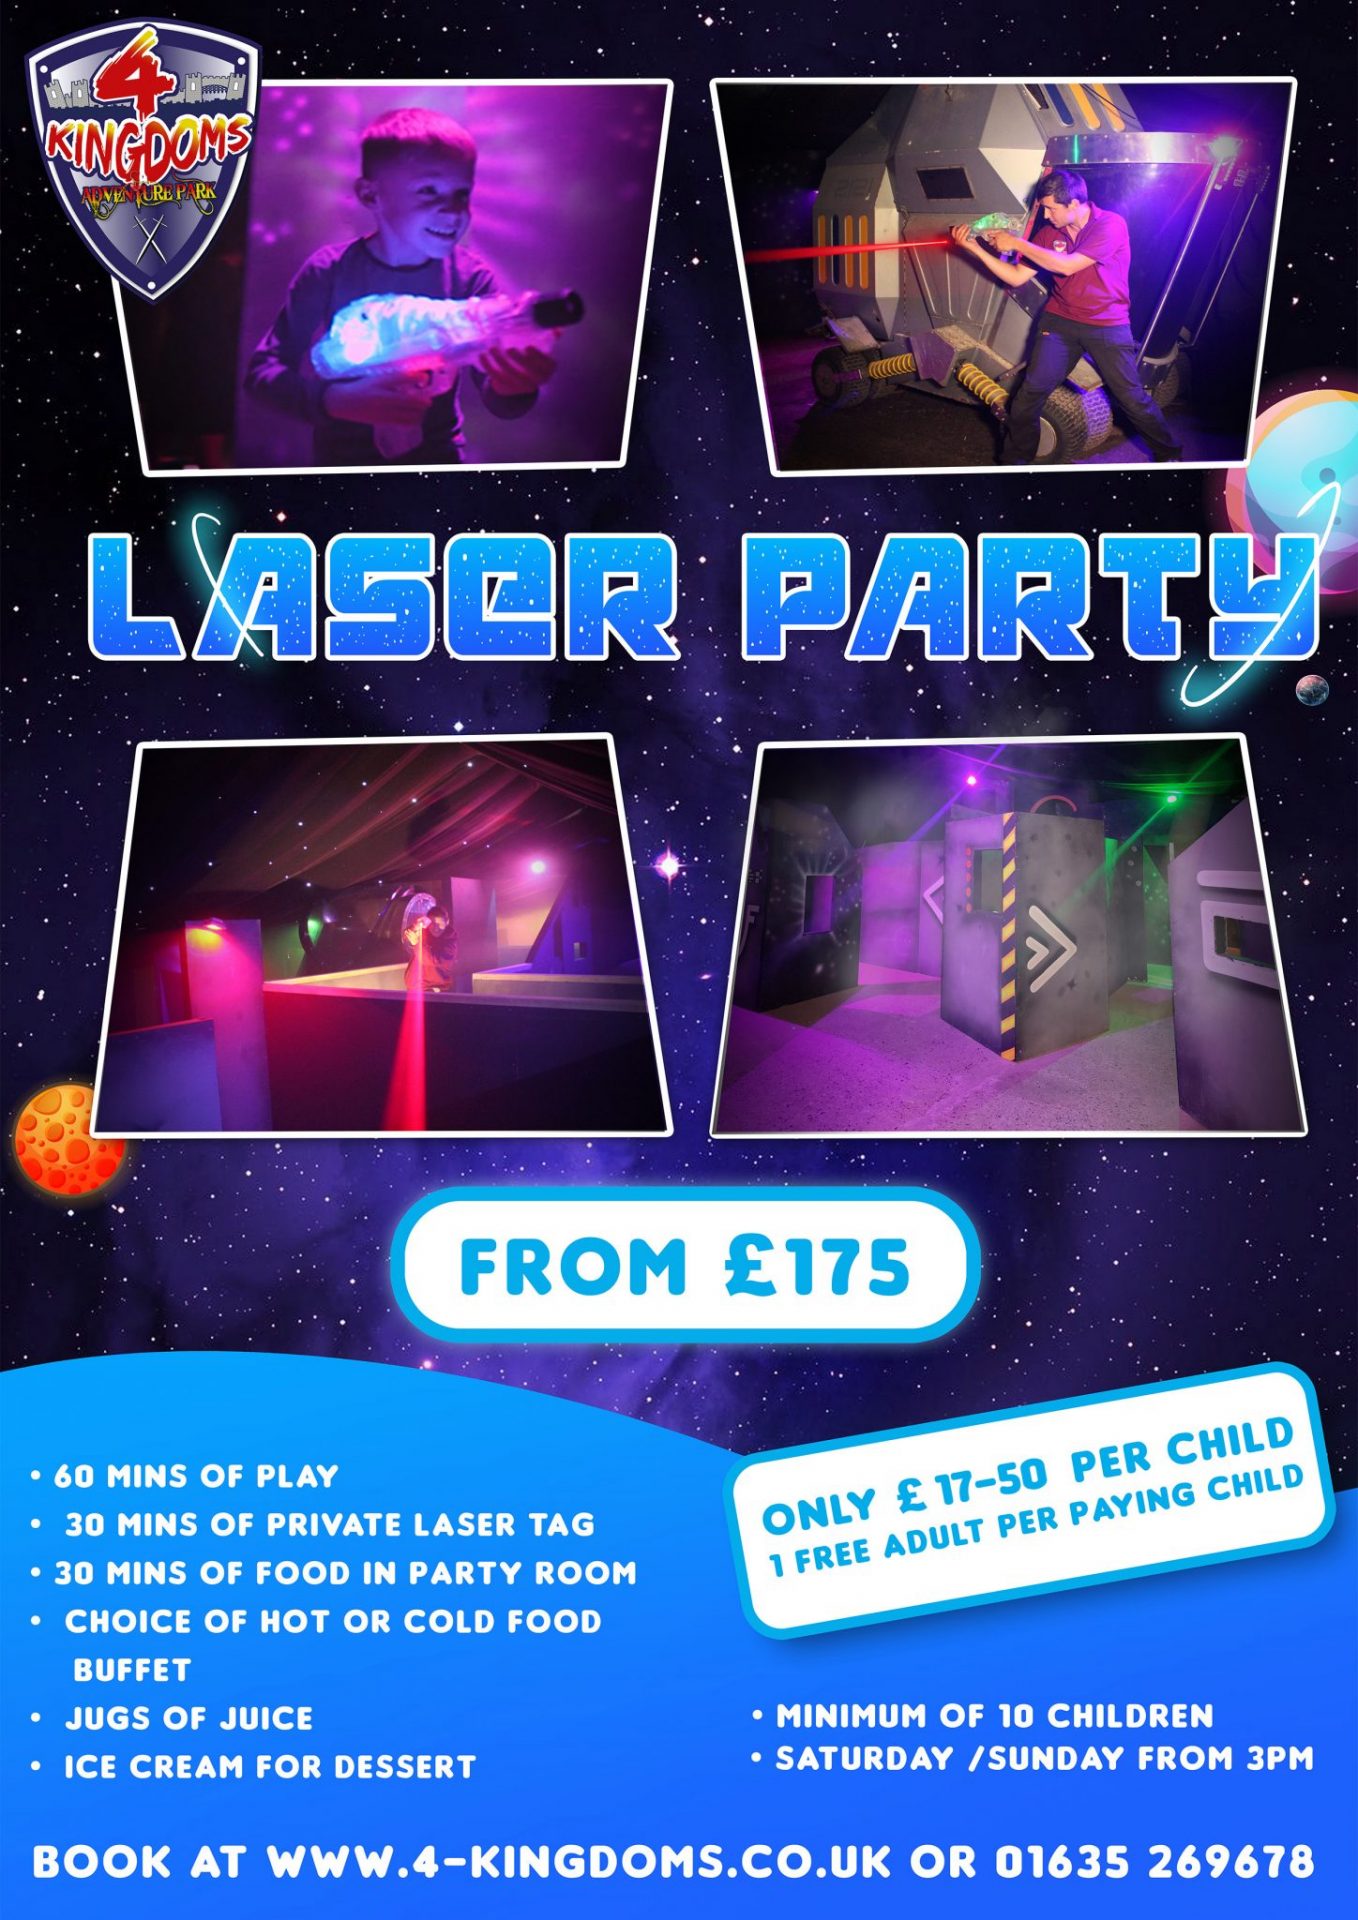 Laser Party poster - from £17.50 per child